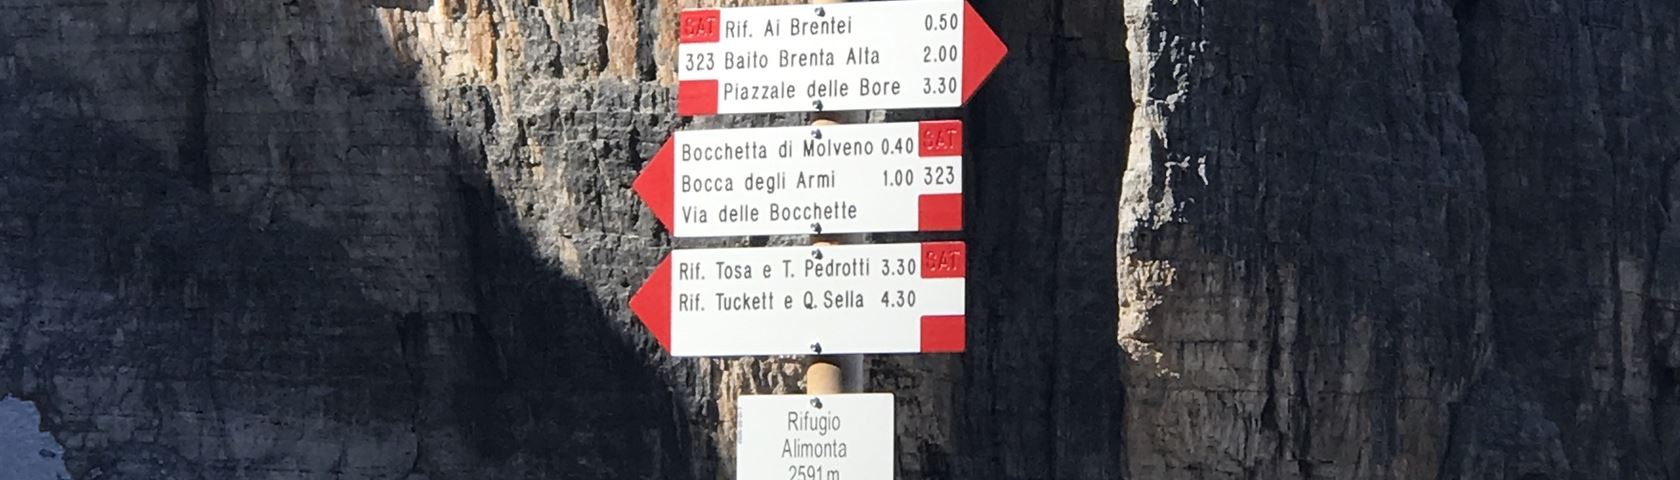 Trail signs in the Dolomites